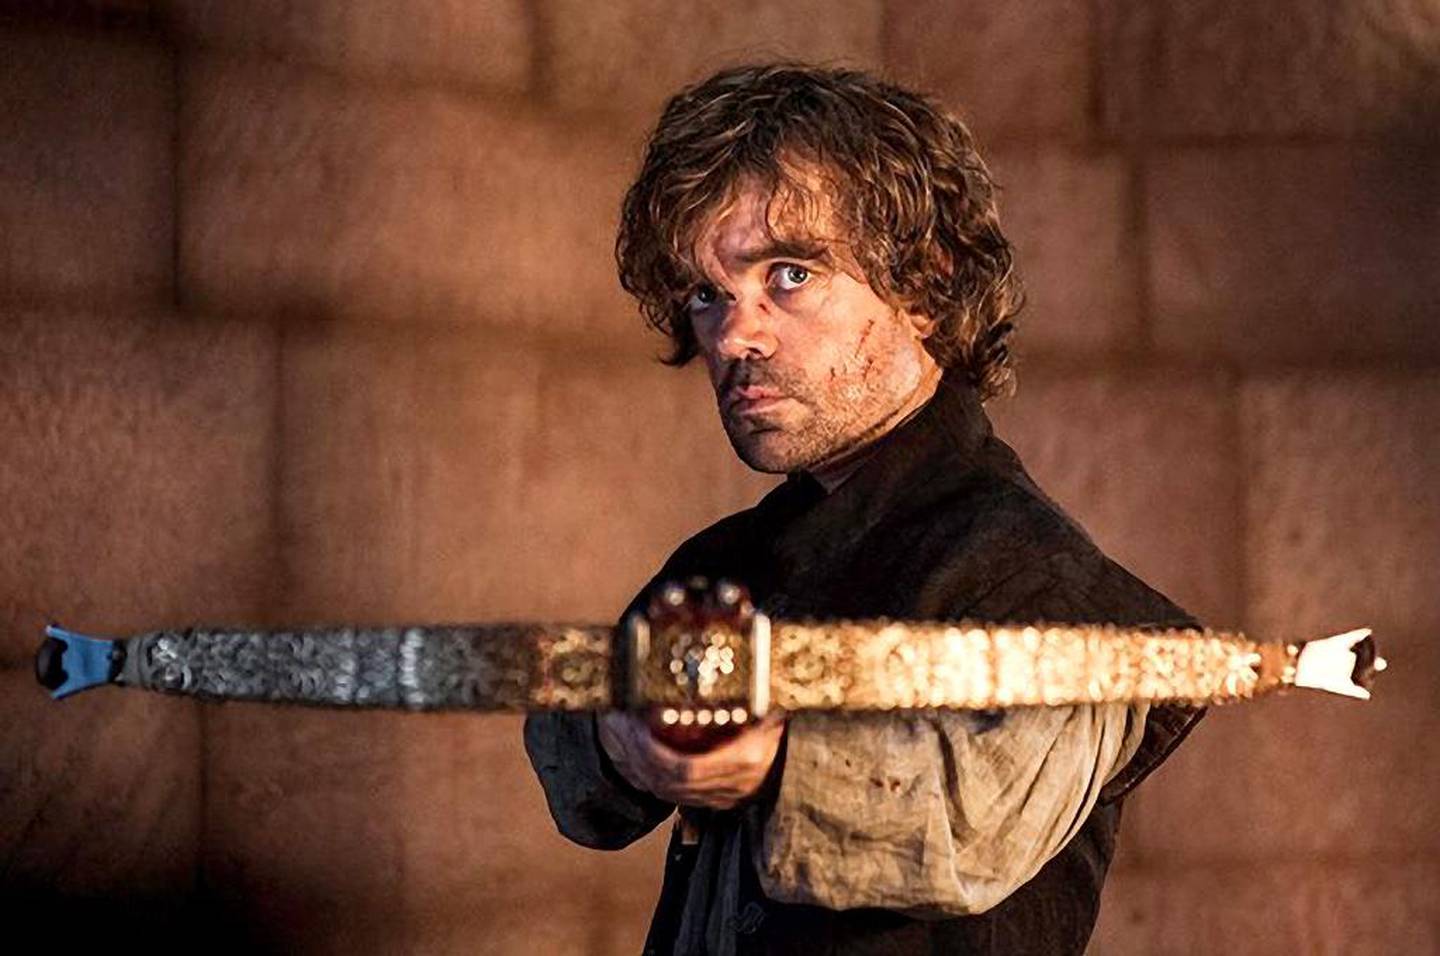 Peter Dinklage players Tyrion Lannister on 'Game of Thrones'. Courtesy HBO